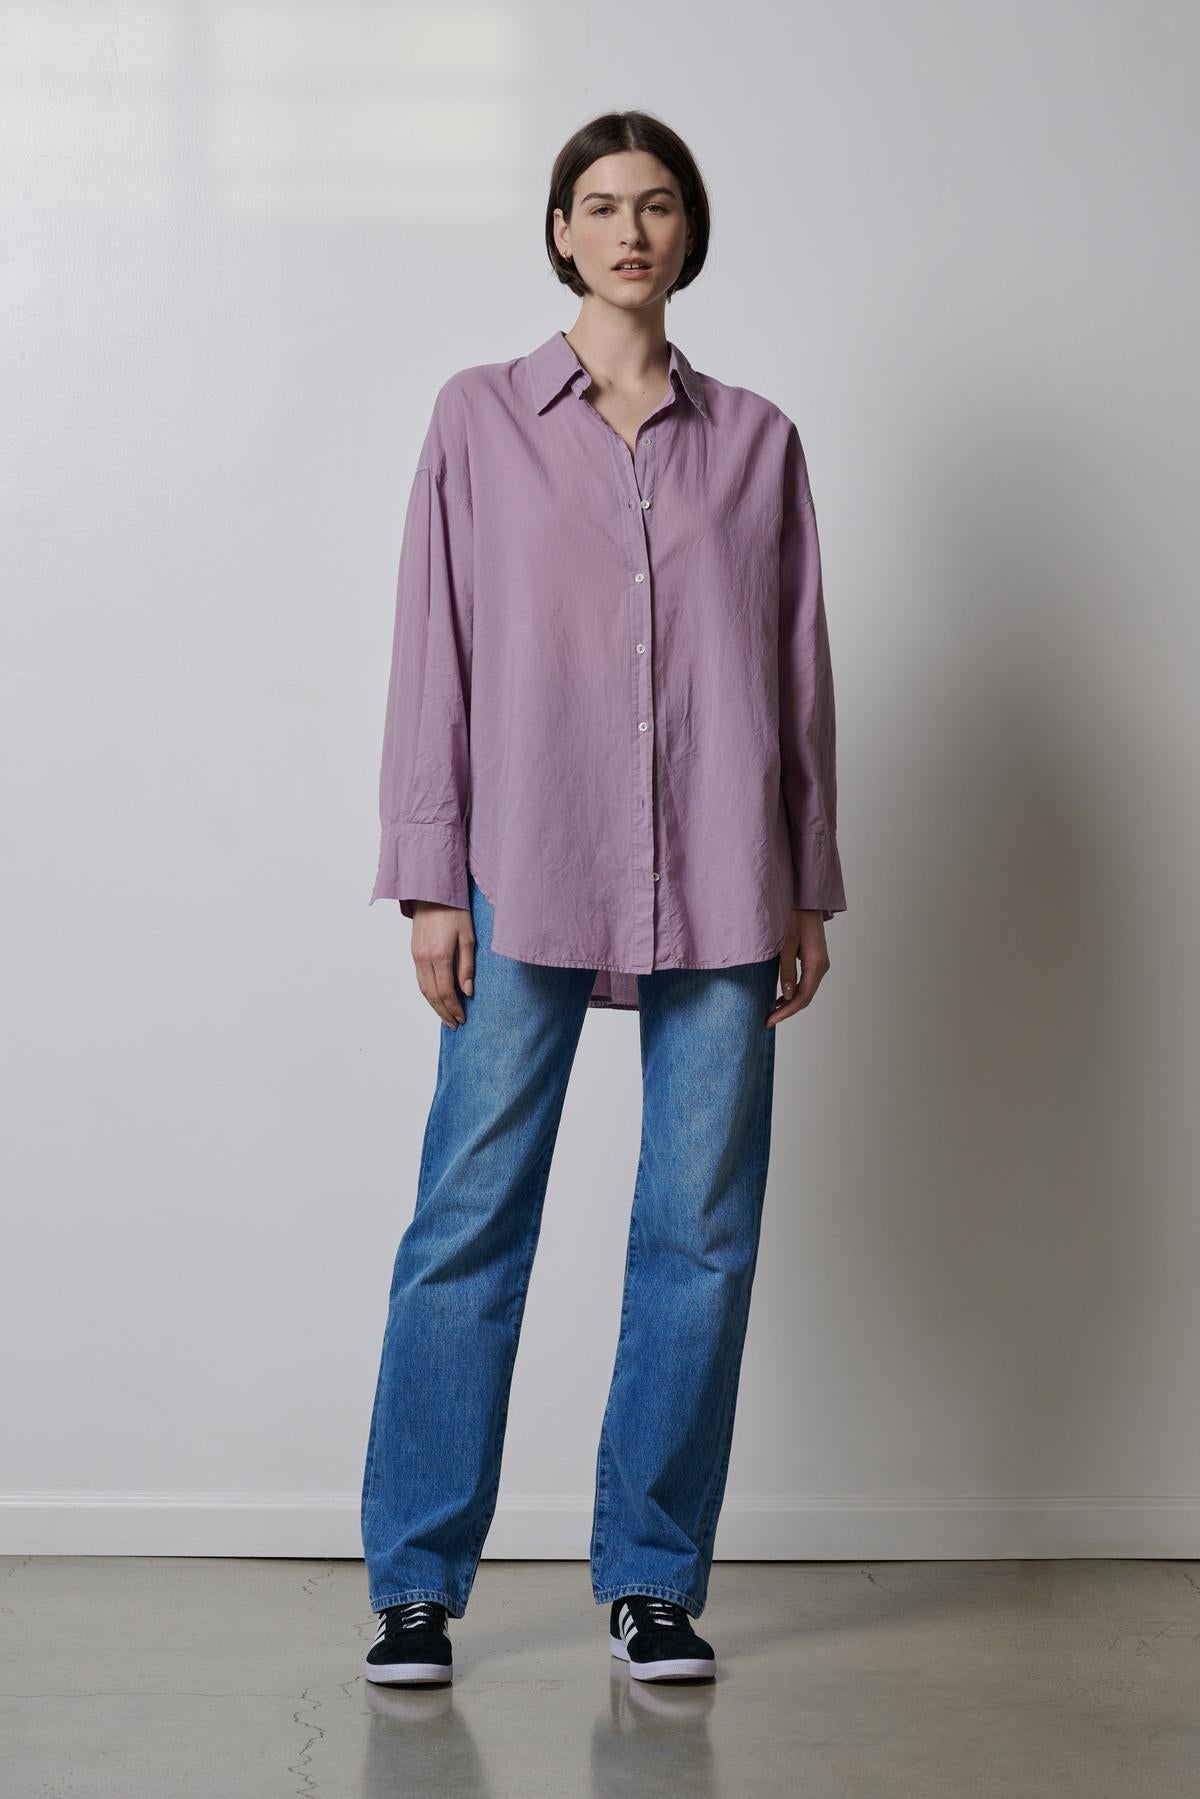 The model is wearing a Velvet by Jenny Graham REDONDO BUTTON-UP SHIRT and blue jeans.-35783066124481